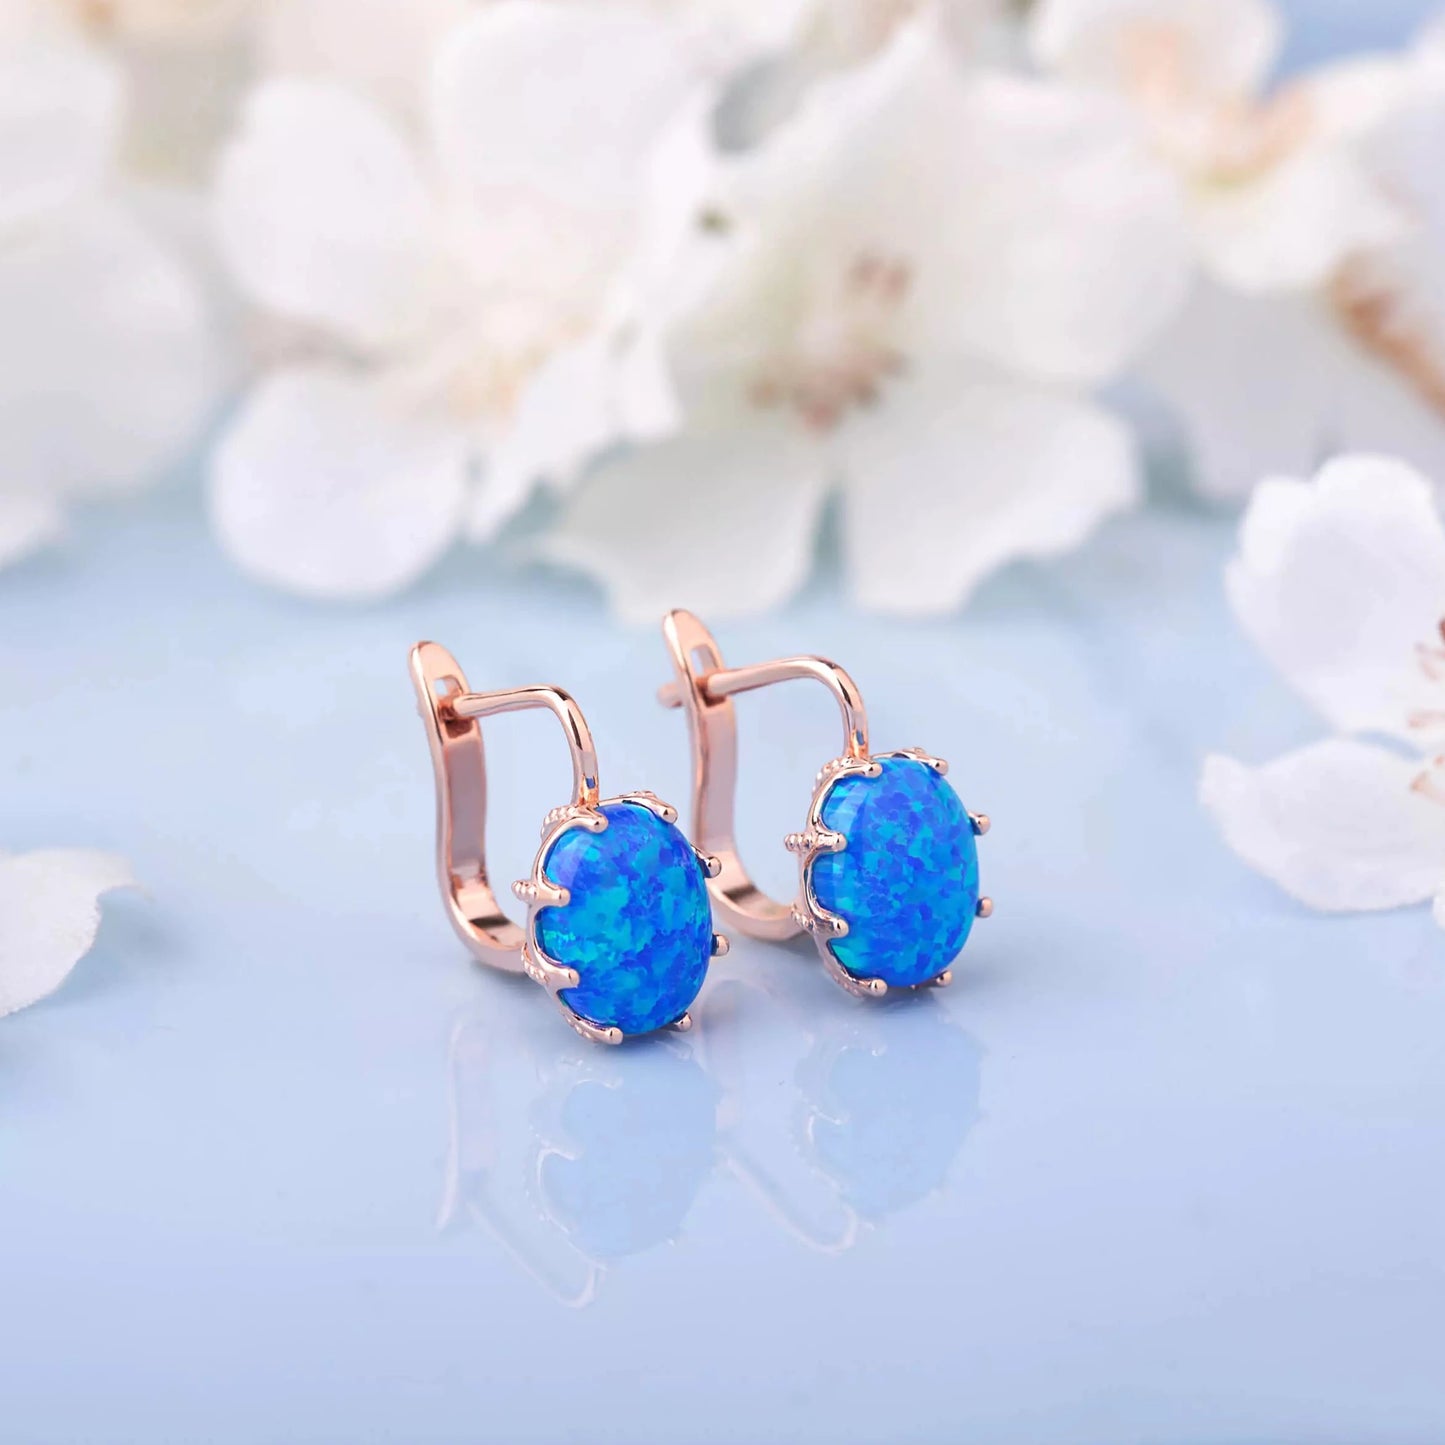  Blue Opal Vintage earrings made of yellow gold